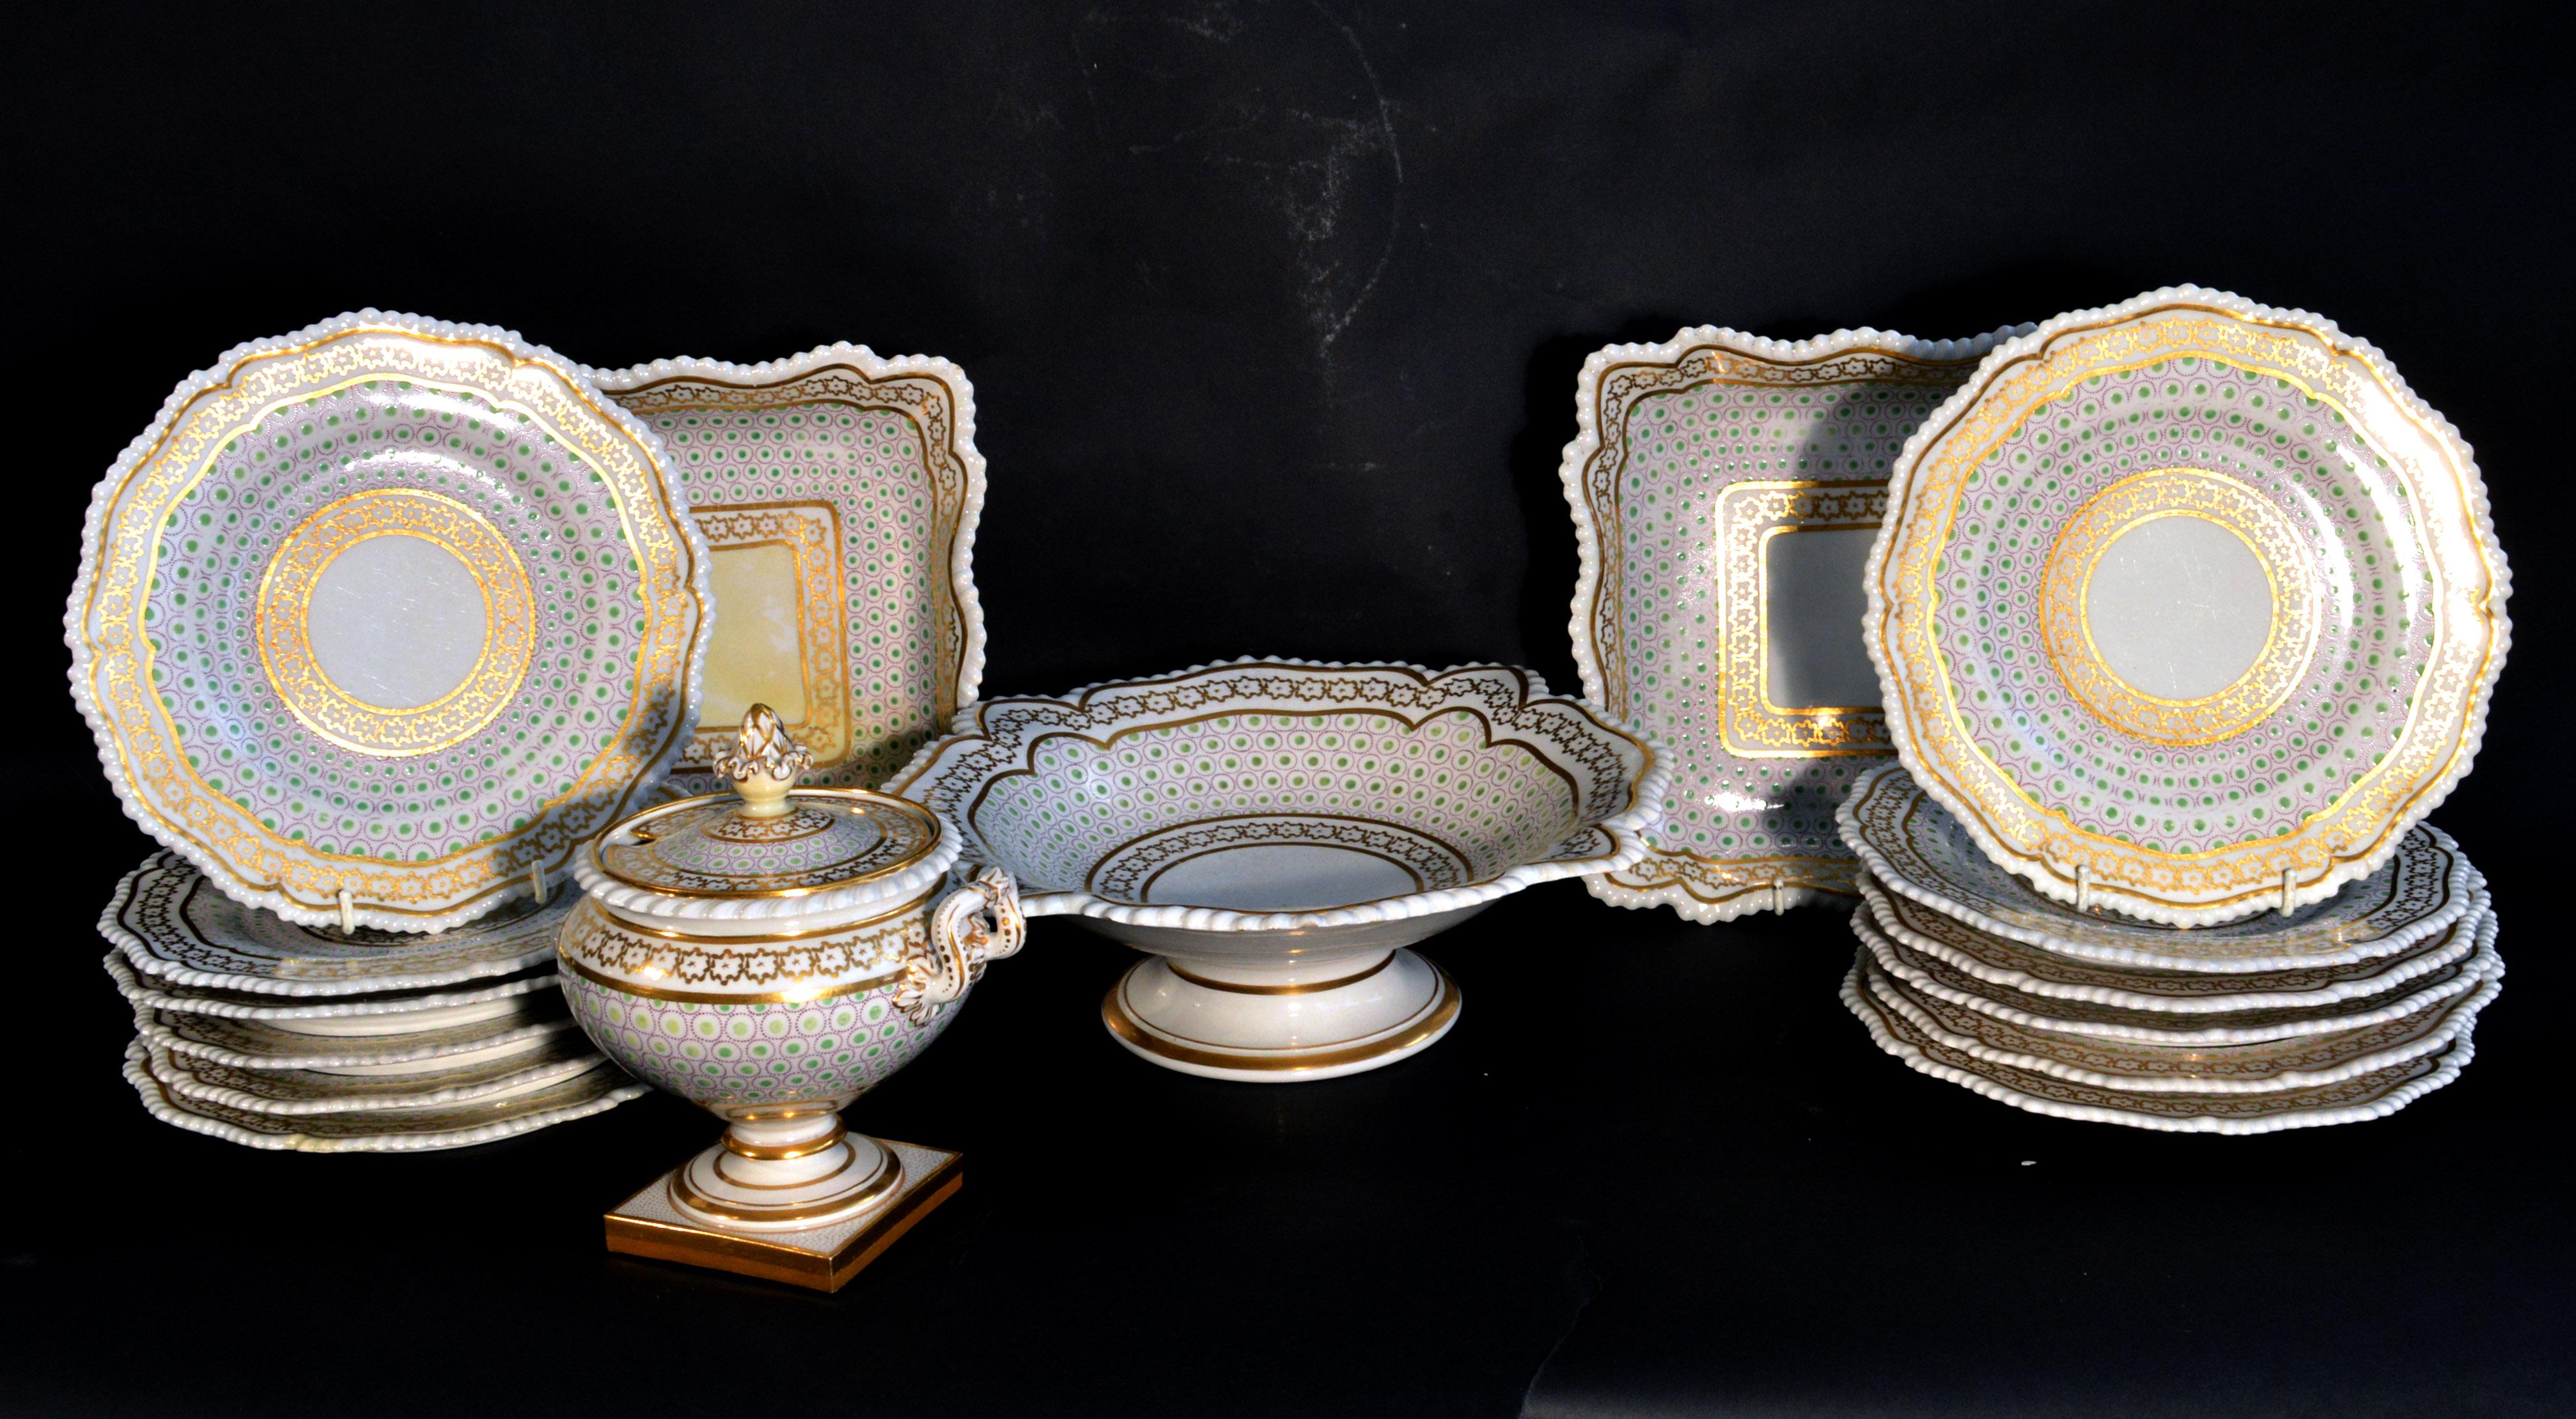 Regency Flight, Barr & Barr Worcester porcelain dessert service,
16 items total,
circa 1820

The attractive Flight, Barr & Barr porcelain dessert service is decorated with two bands of gilt on the border and repeated around the central well with